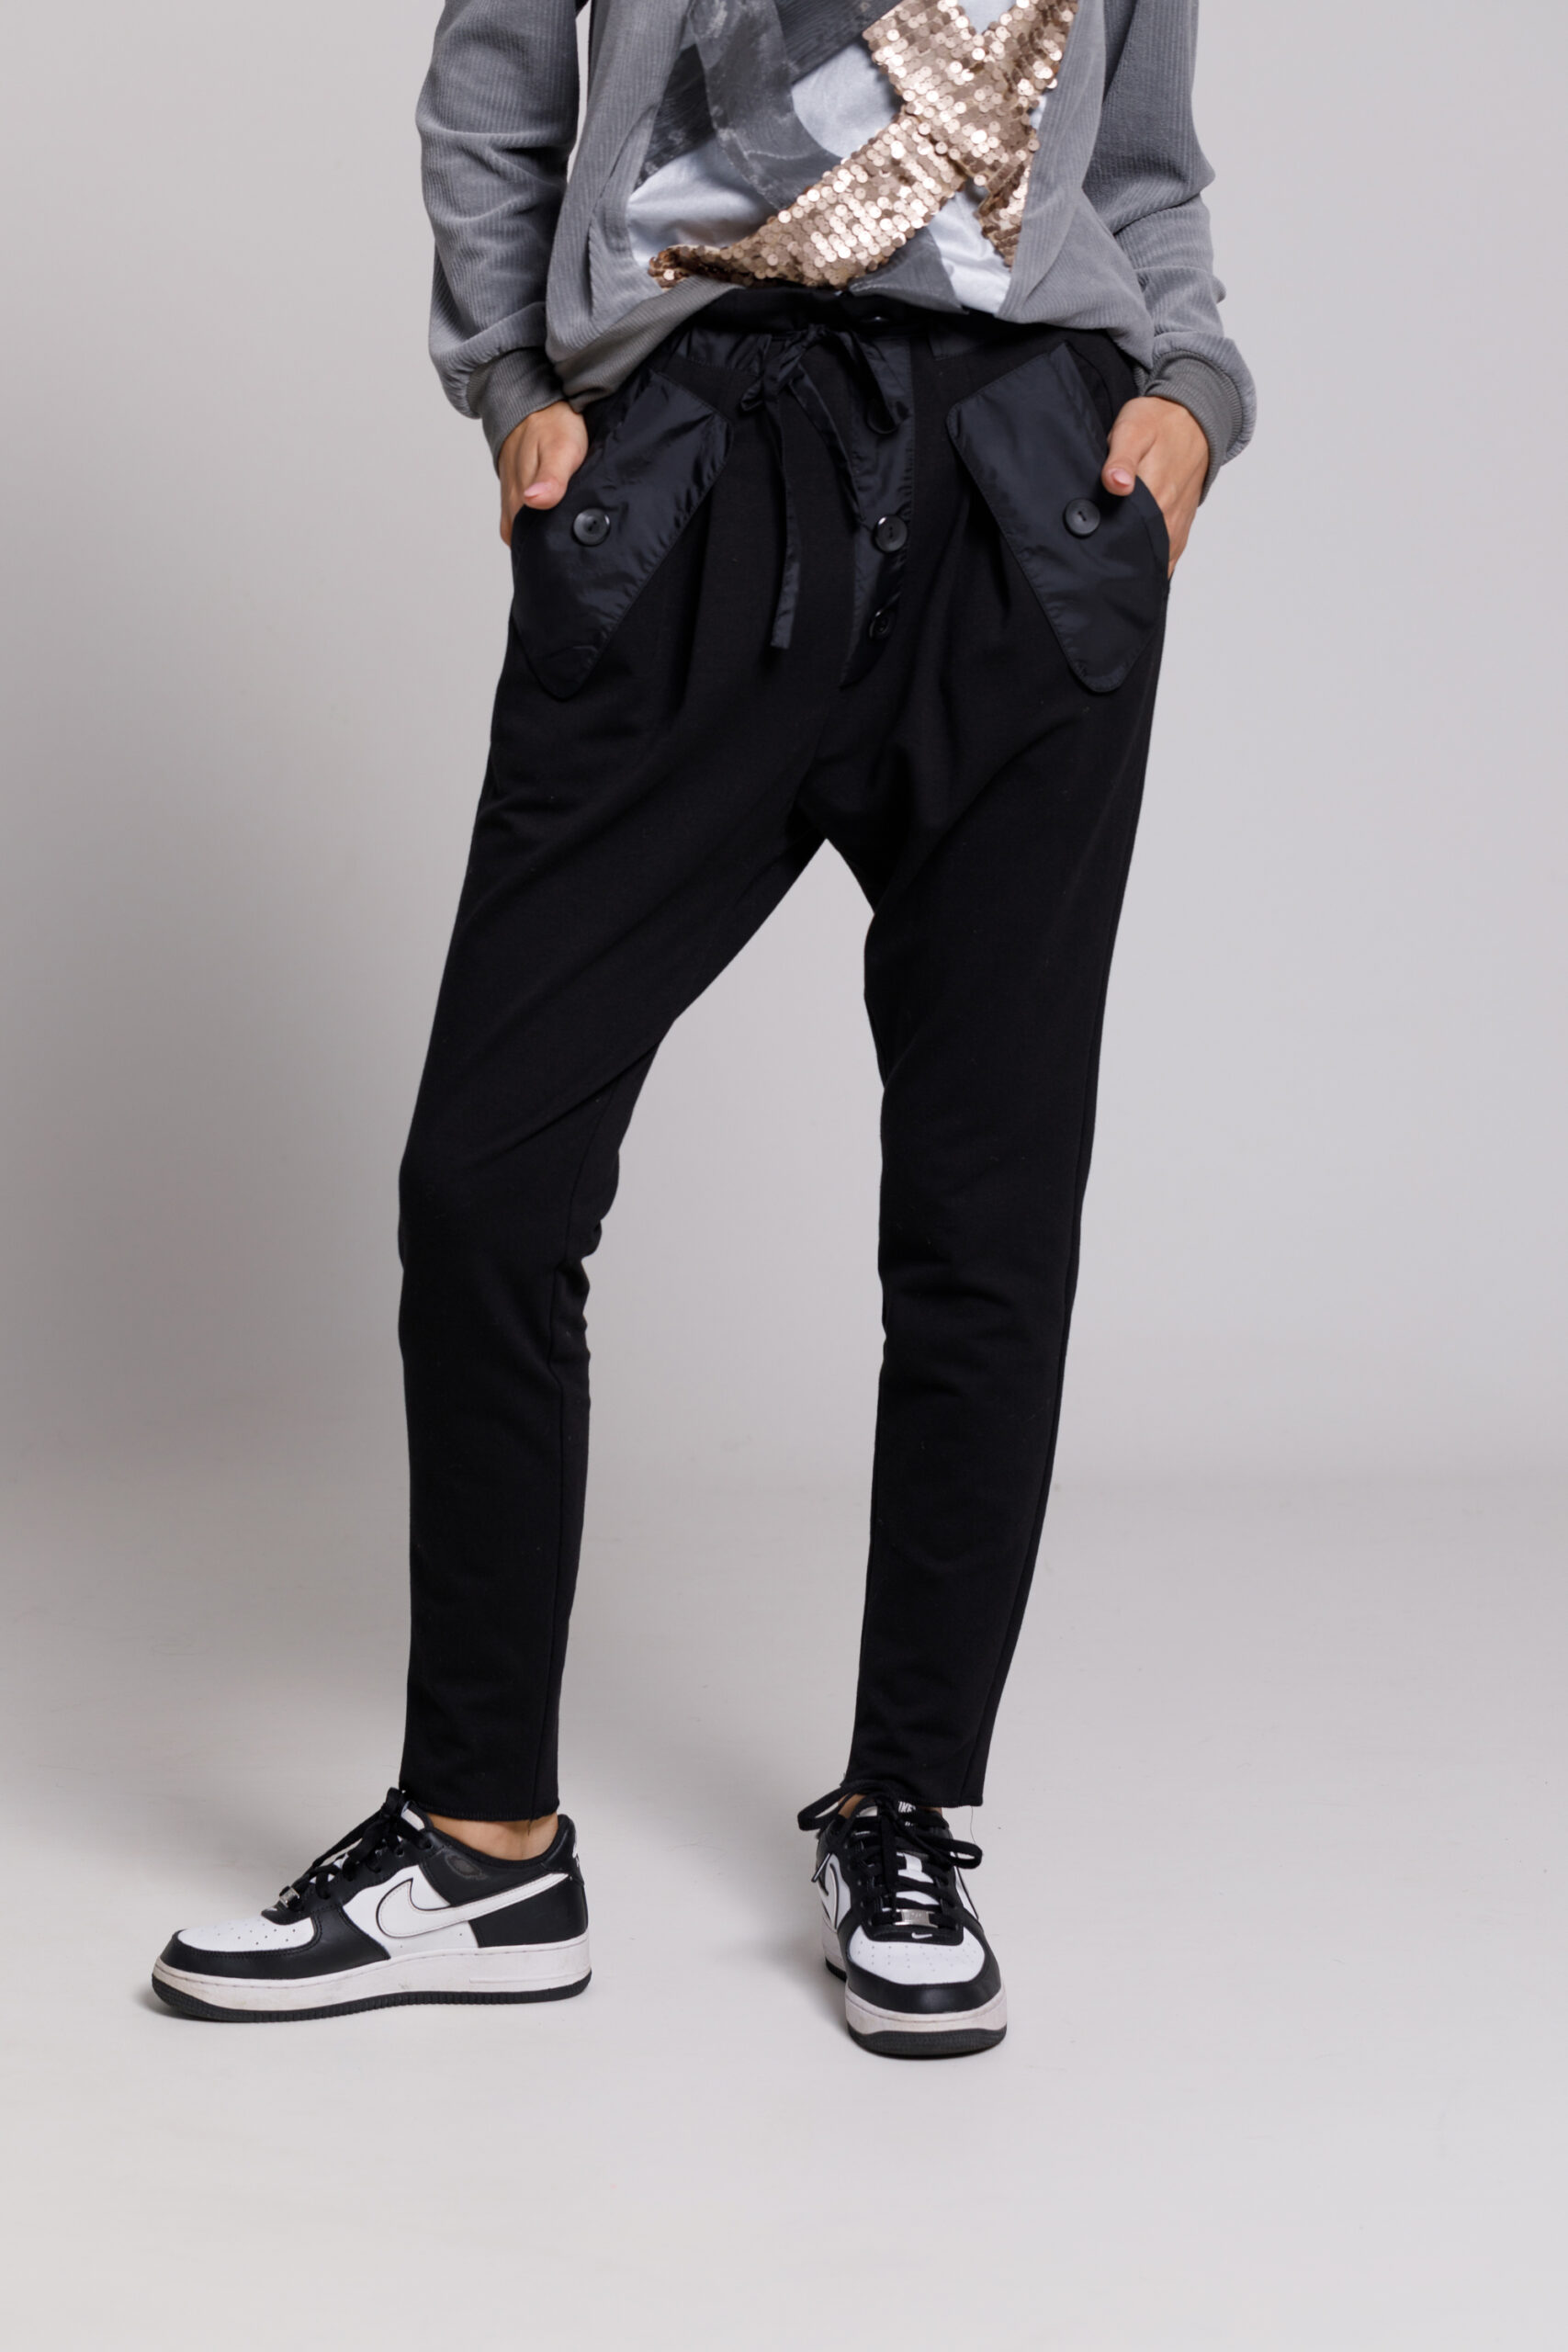 NYO casual black velvet pants with pockets and flap. Natural fabrics, original design, handmade embroidery